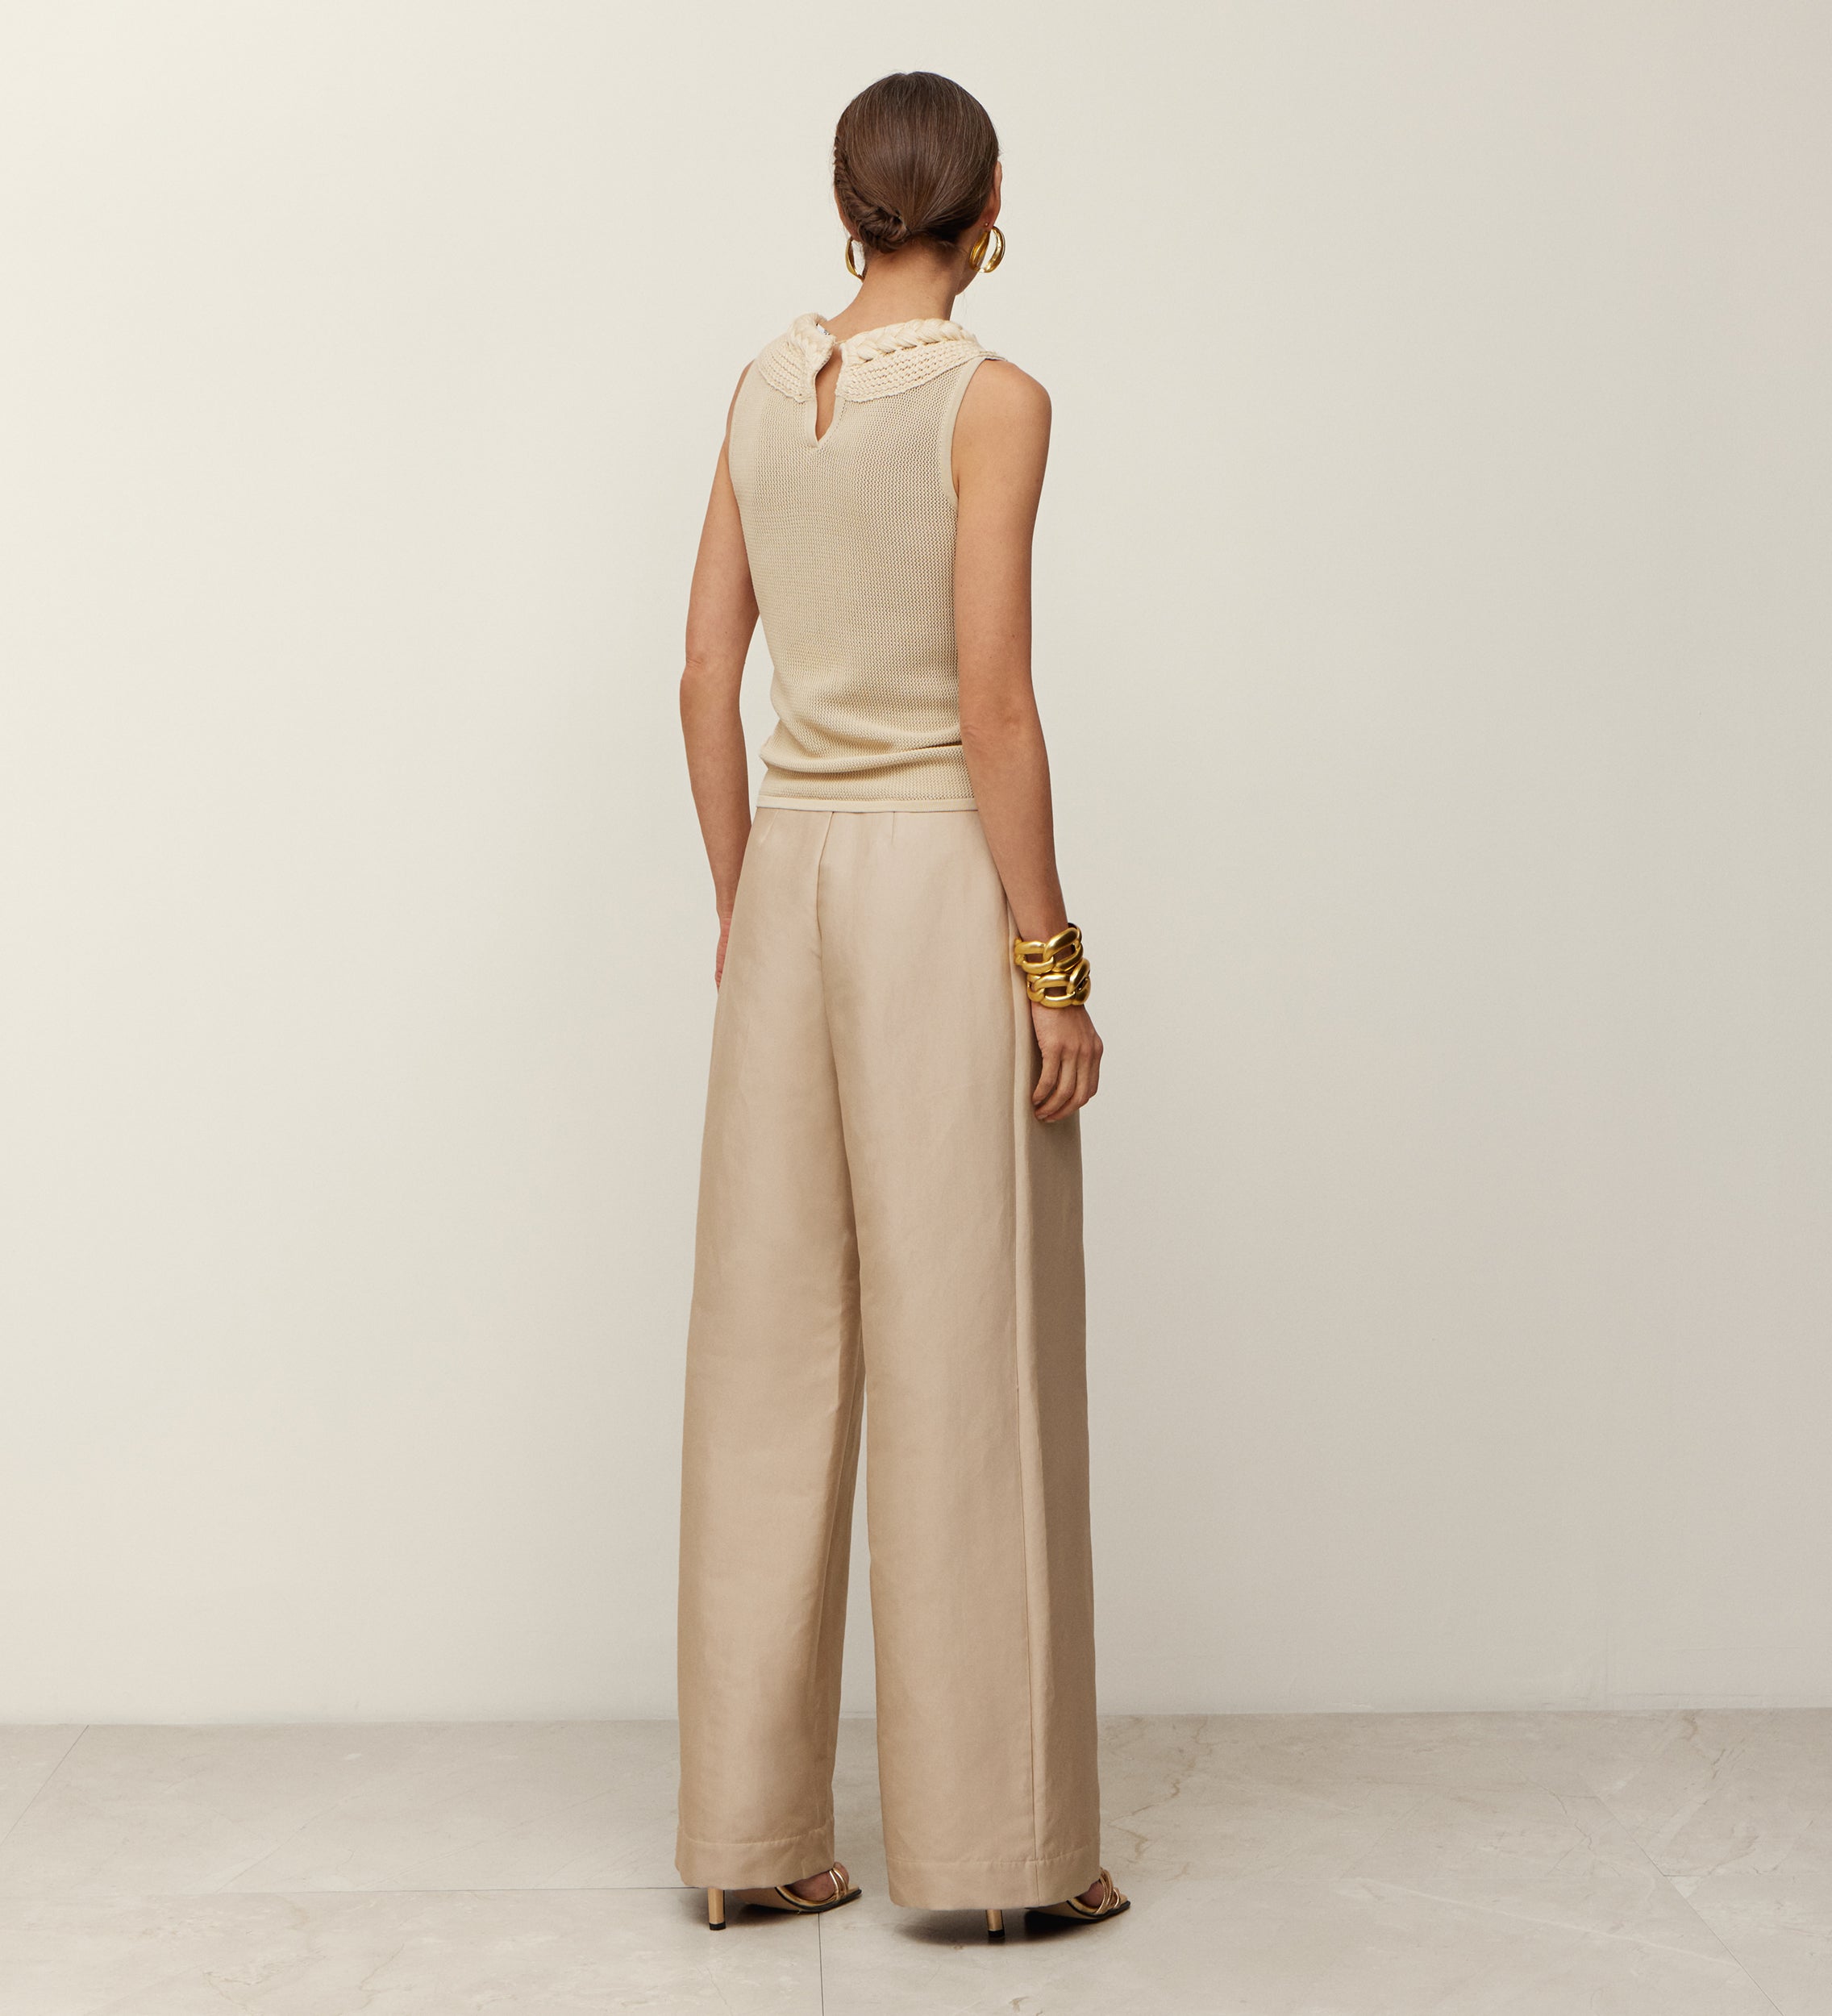 Wide pleated trousers